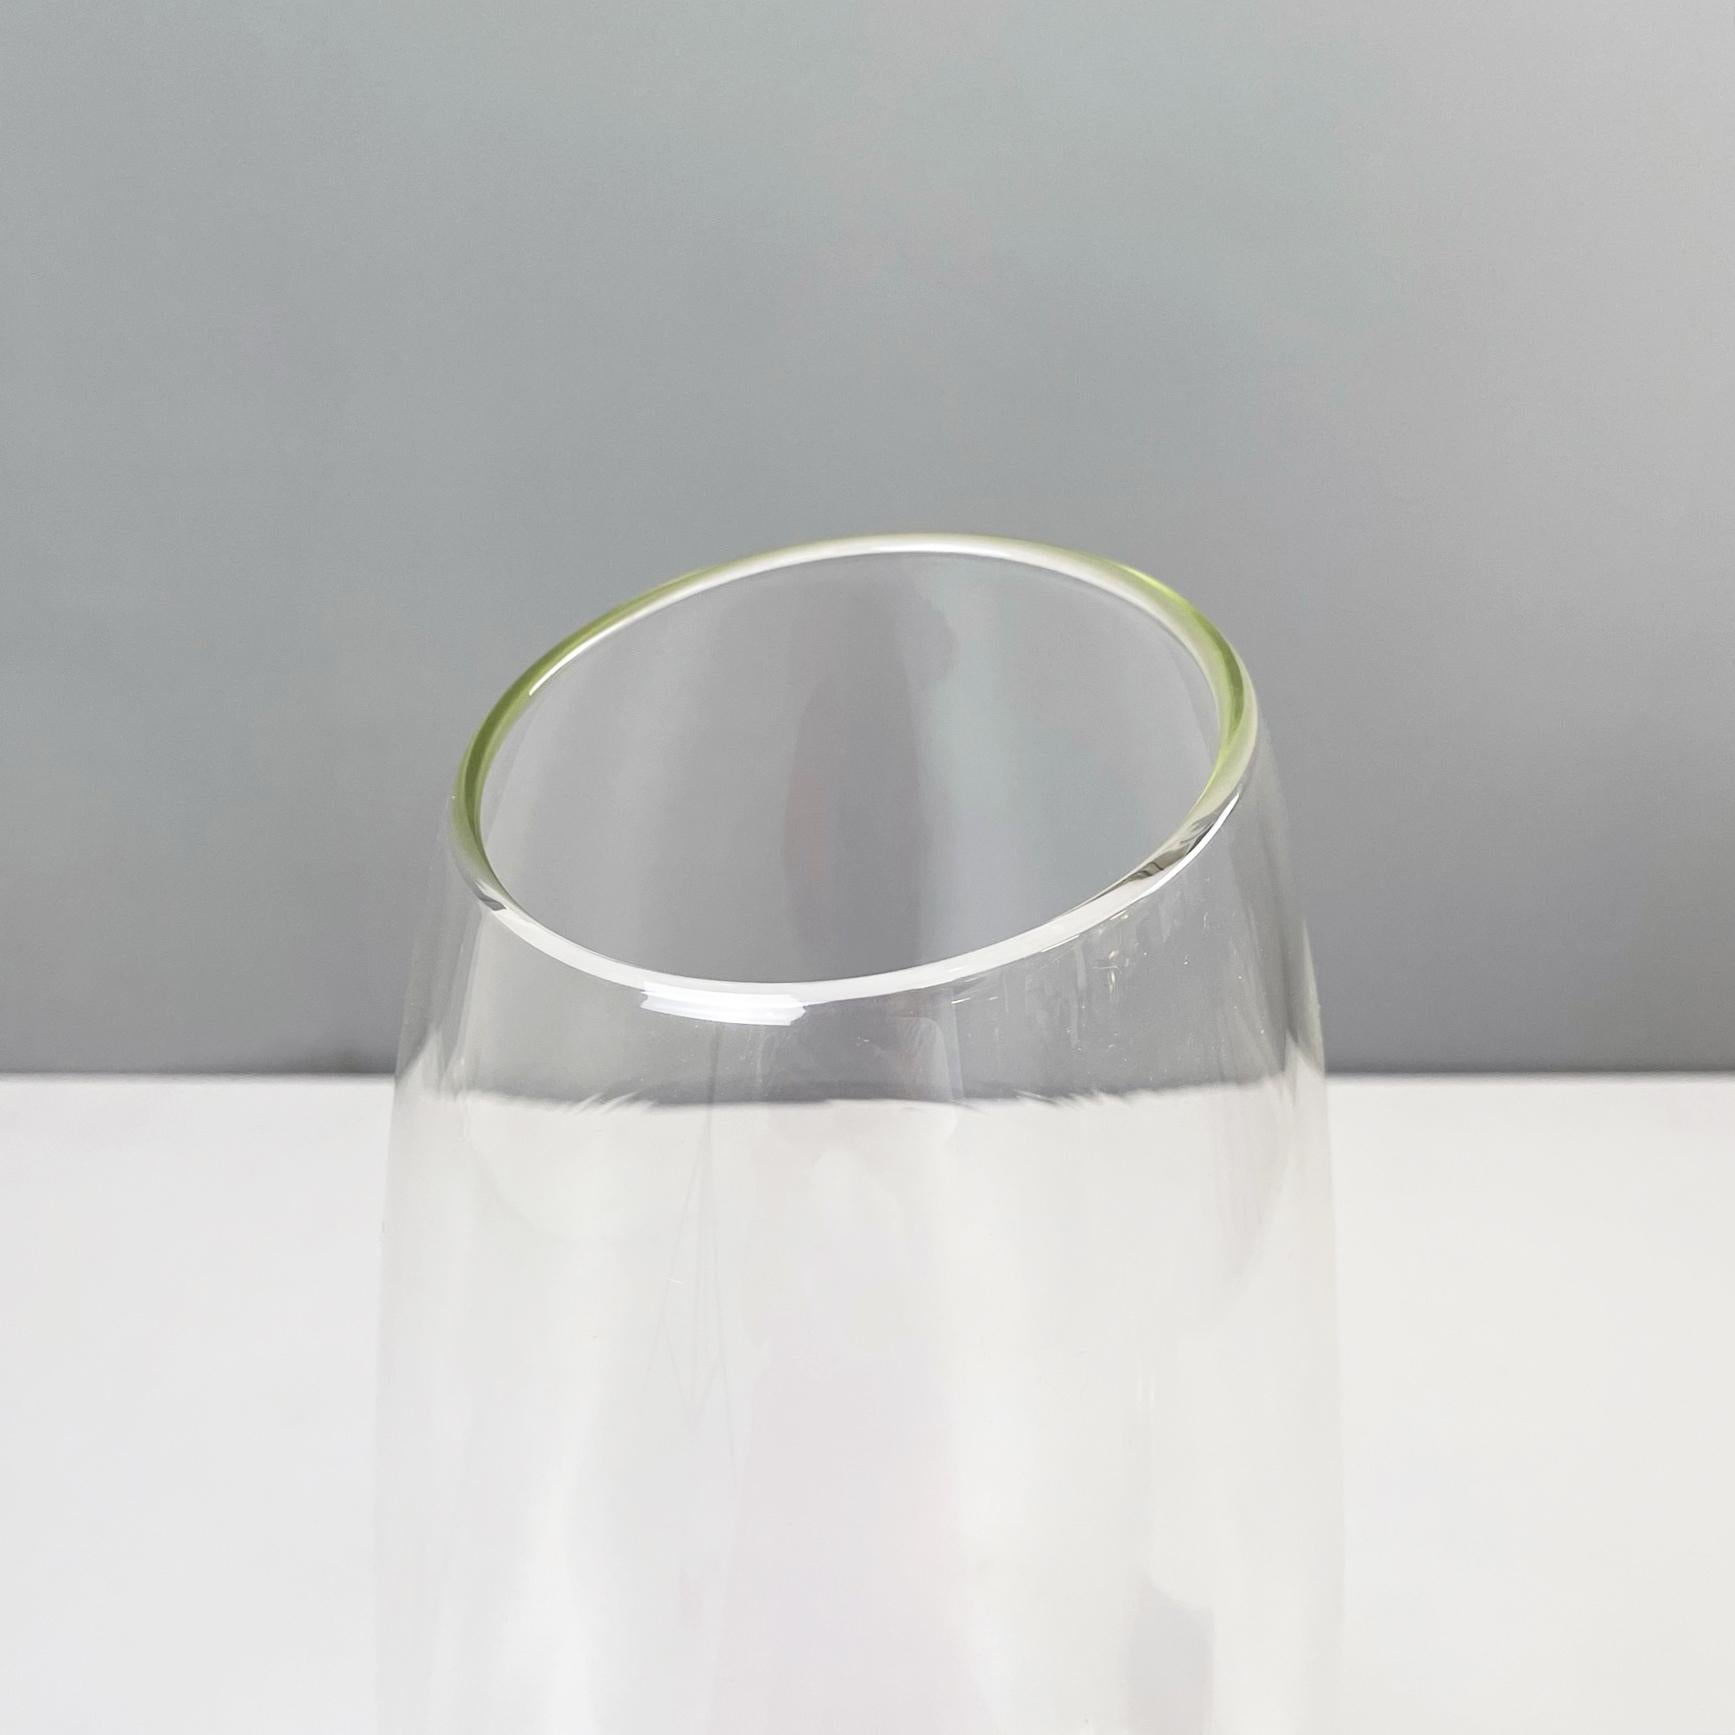 Modern Italian modern Glass vase with round shape by Roberto Faccioli, 1990s For Sale